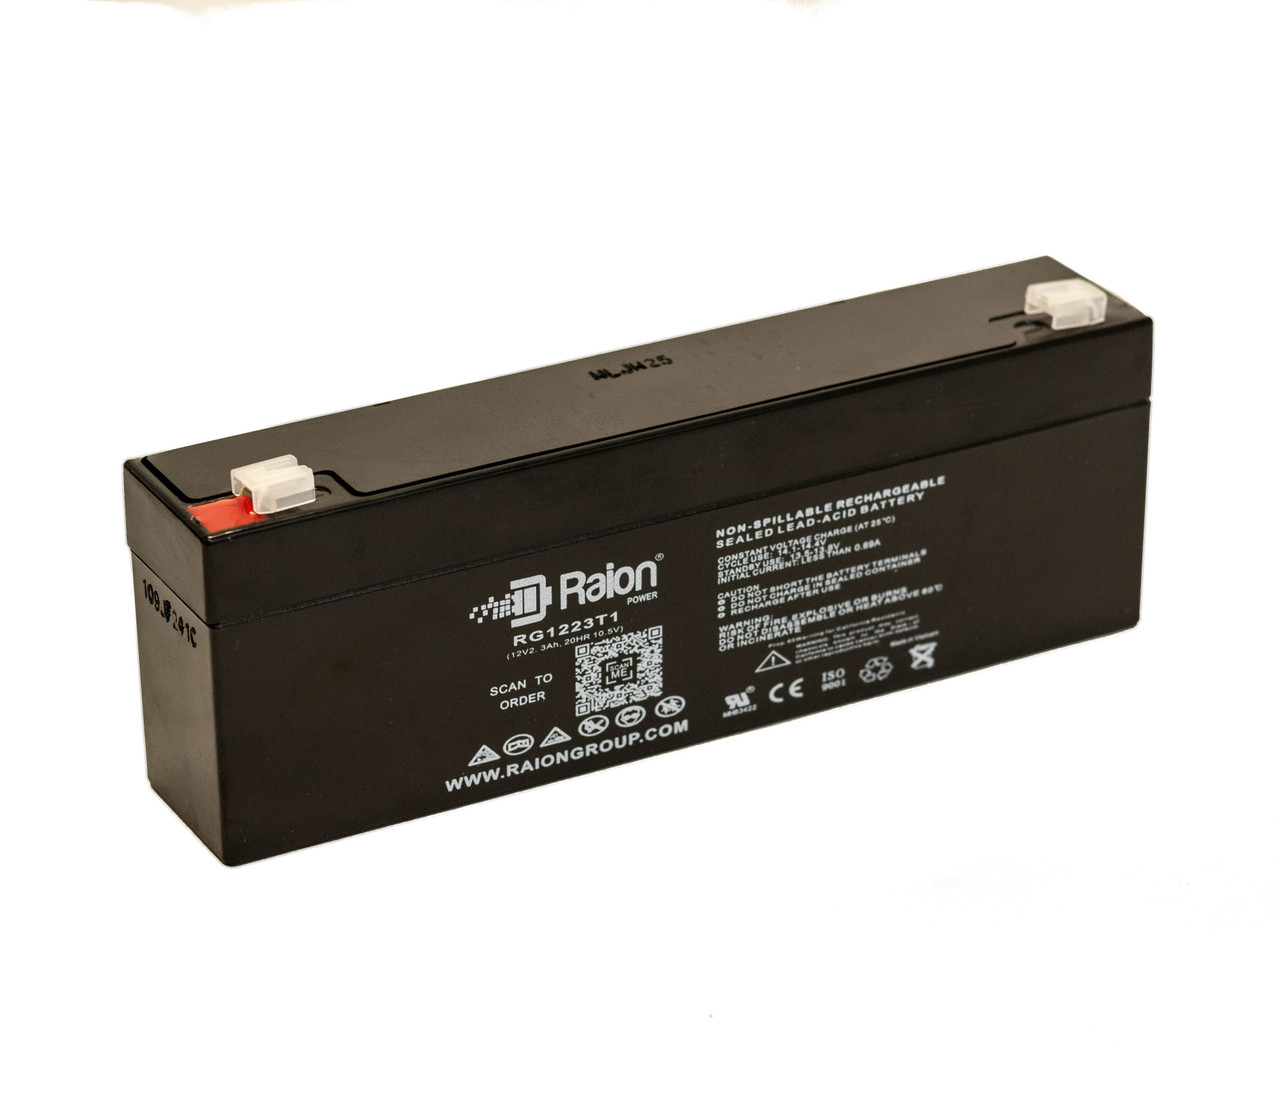 Raion Power RG1223T1 Replacement Battery for Vision CP1223